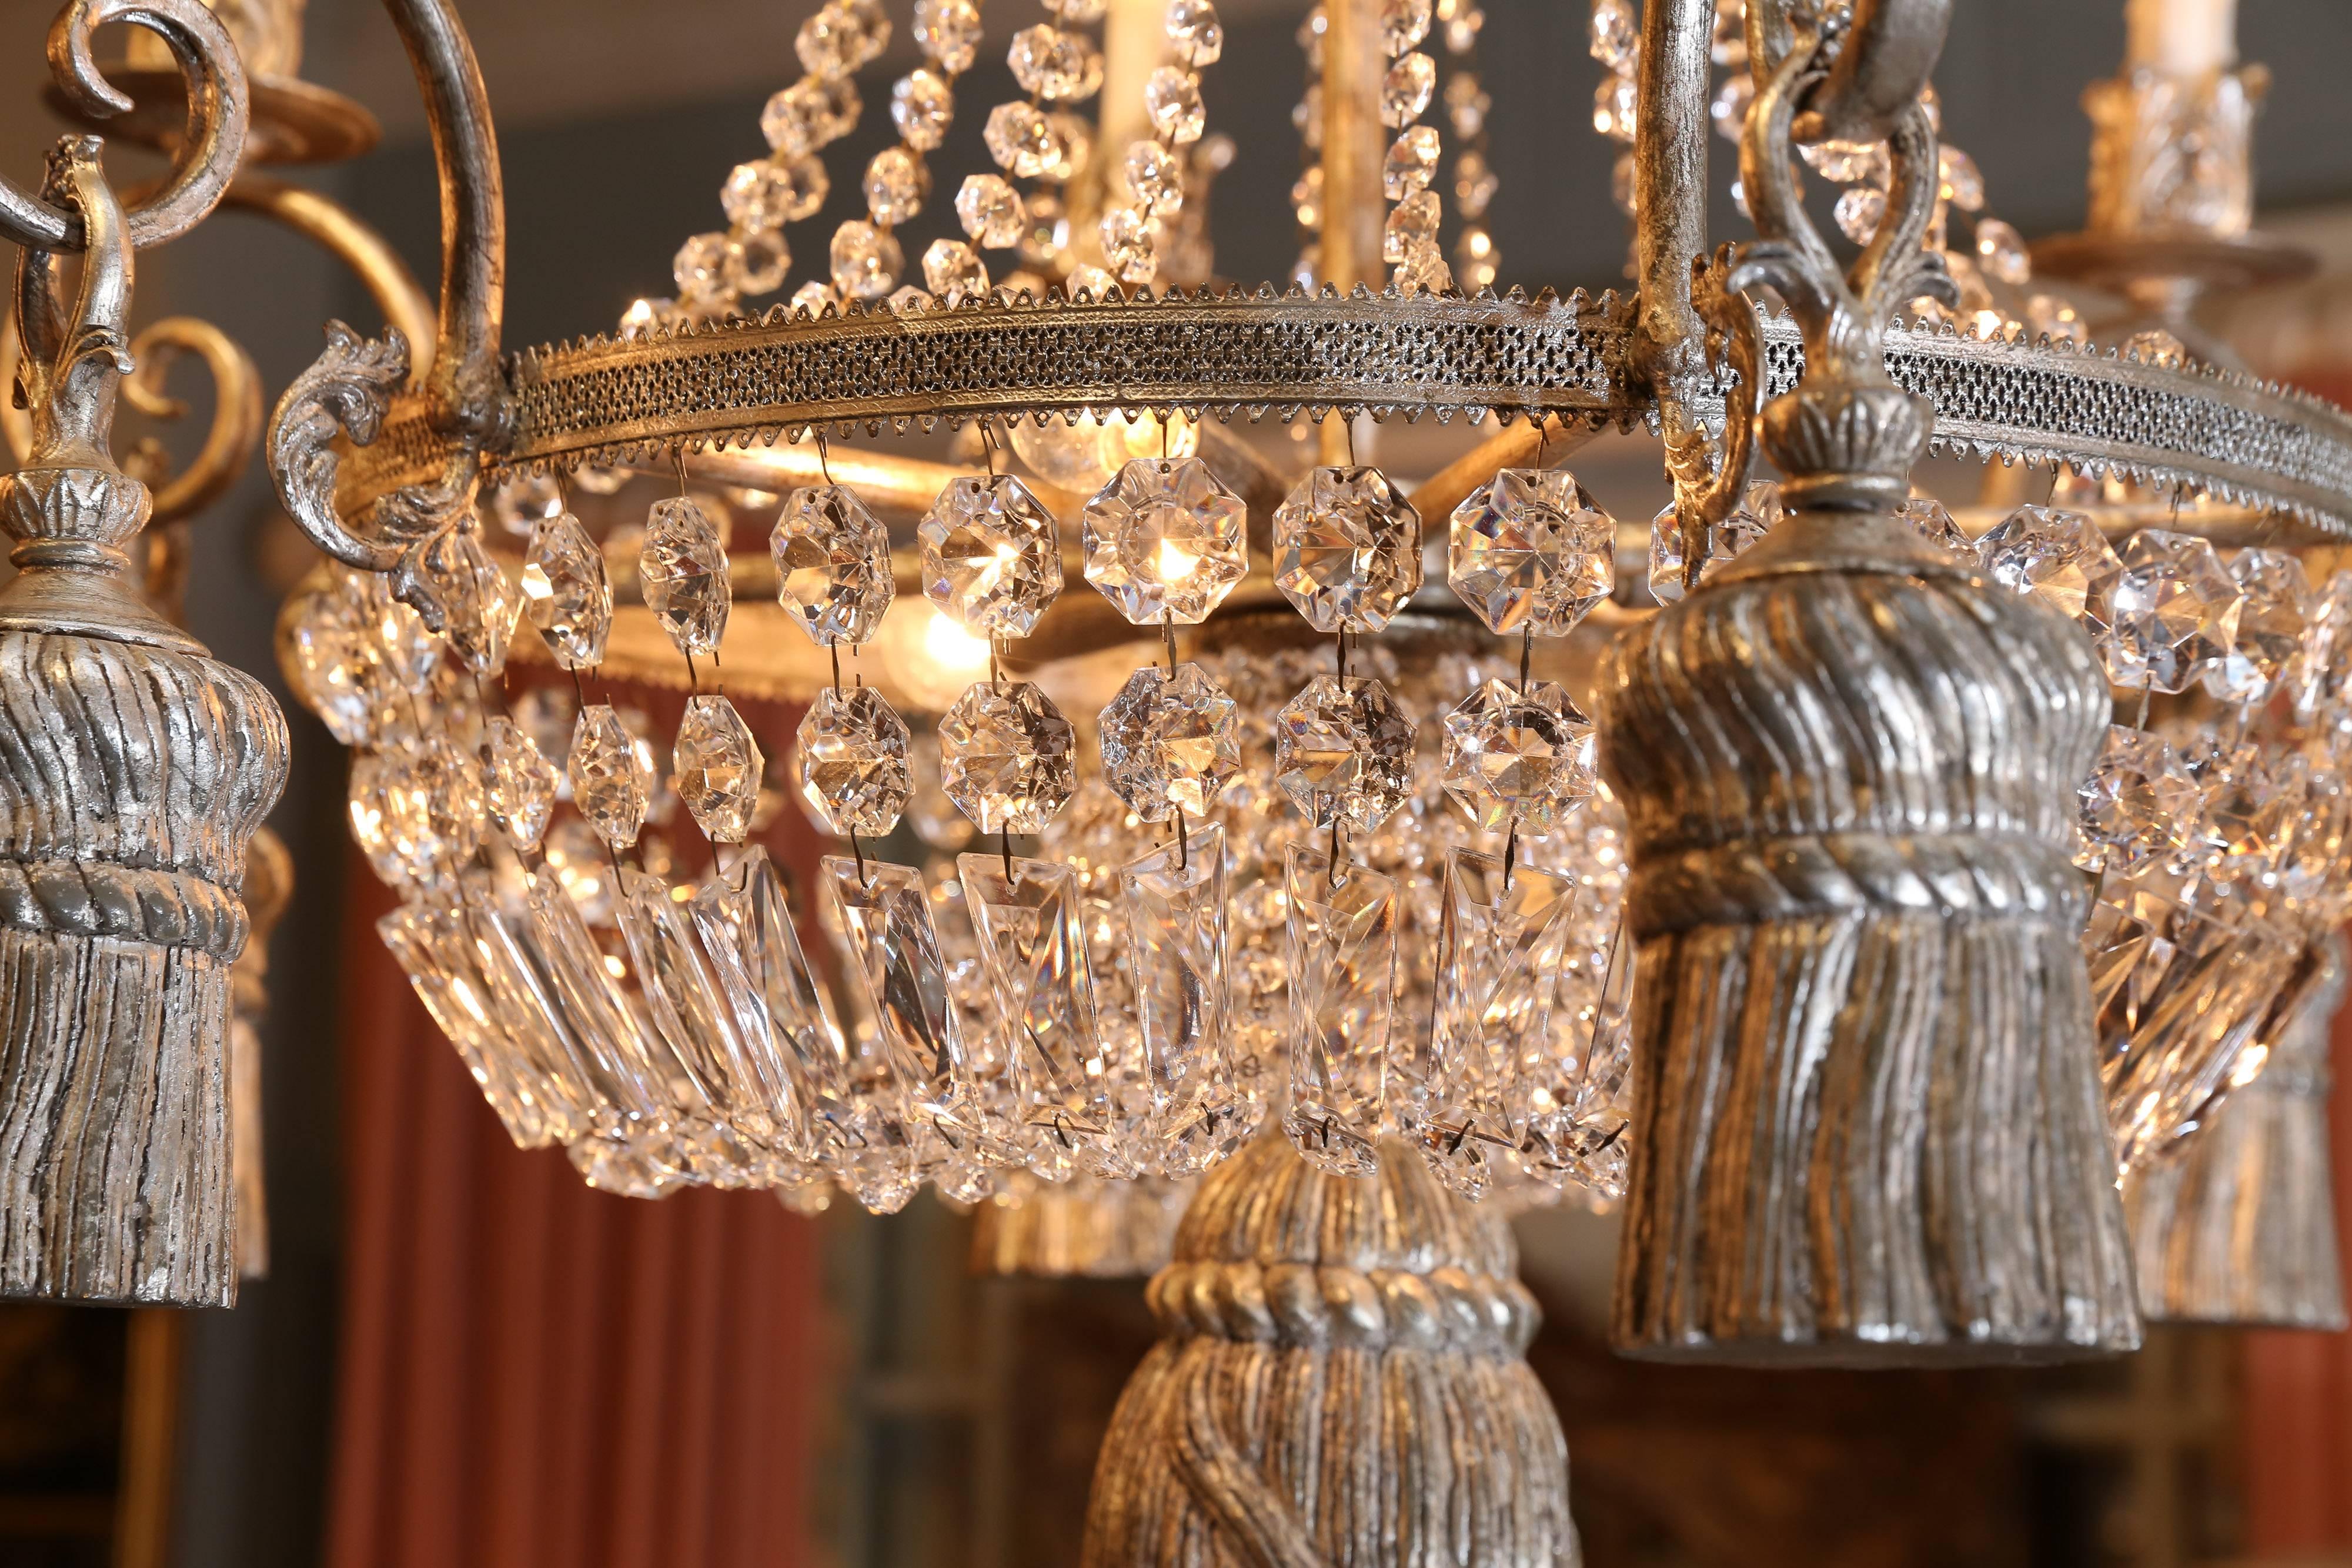 Beaded Empire style chandelier. All of the brass on chandelier is painted in a silver gilt finish, as well as wood- carved oversized tassels, which add a bit of whimsy to this piece.

Pair of bands on chandelier are pierced.

Silver gilt